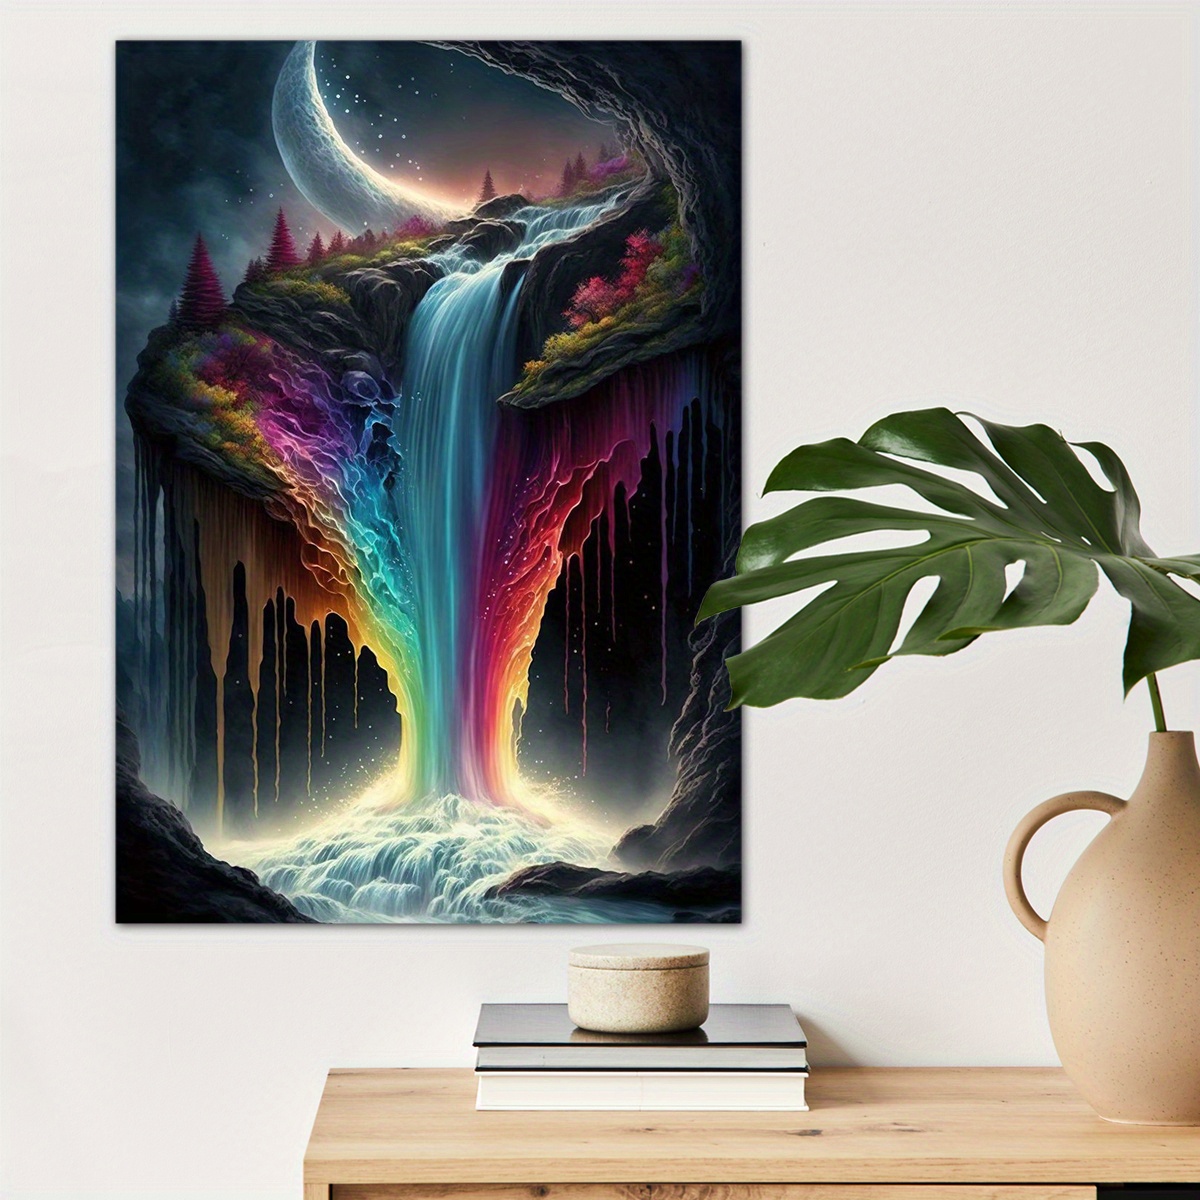 

1pc Rainbow Waterfall Poster Canvas Wall Art For Home Decor, Fantasy Poster Wall Decor High Quality Canvas Prints For Living Room Bedroom Kitchen Office Cafe Decor, Perfect Gift And Decoration